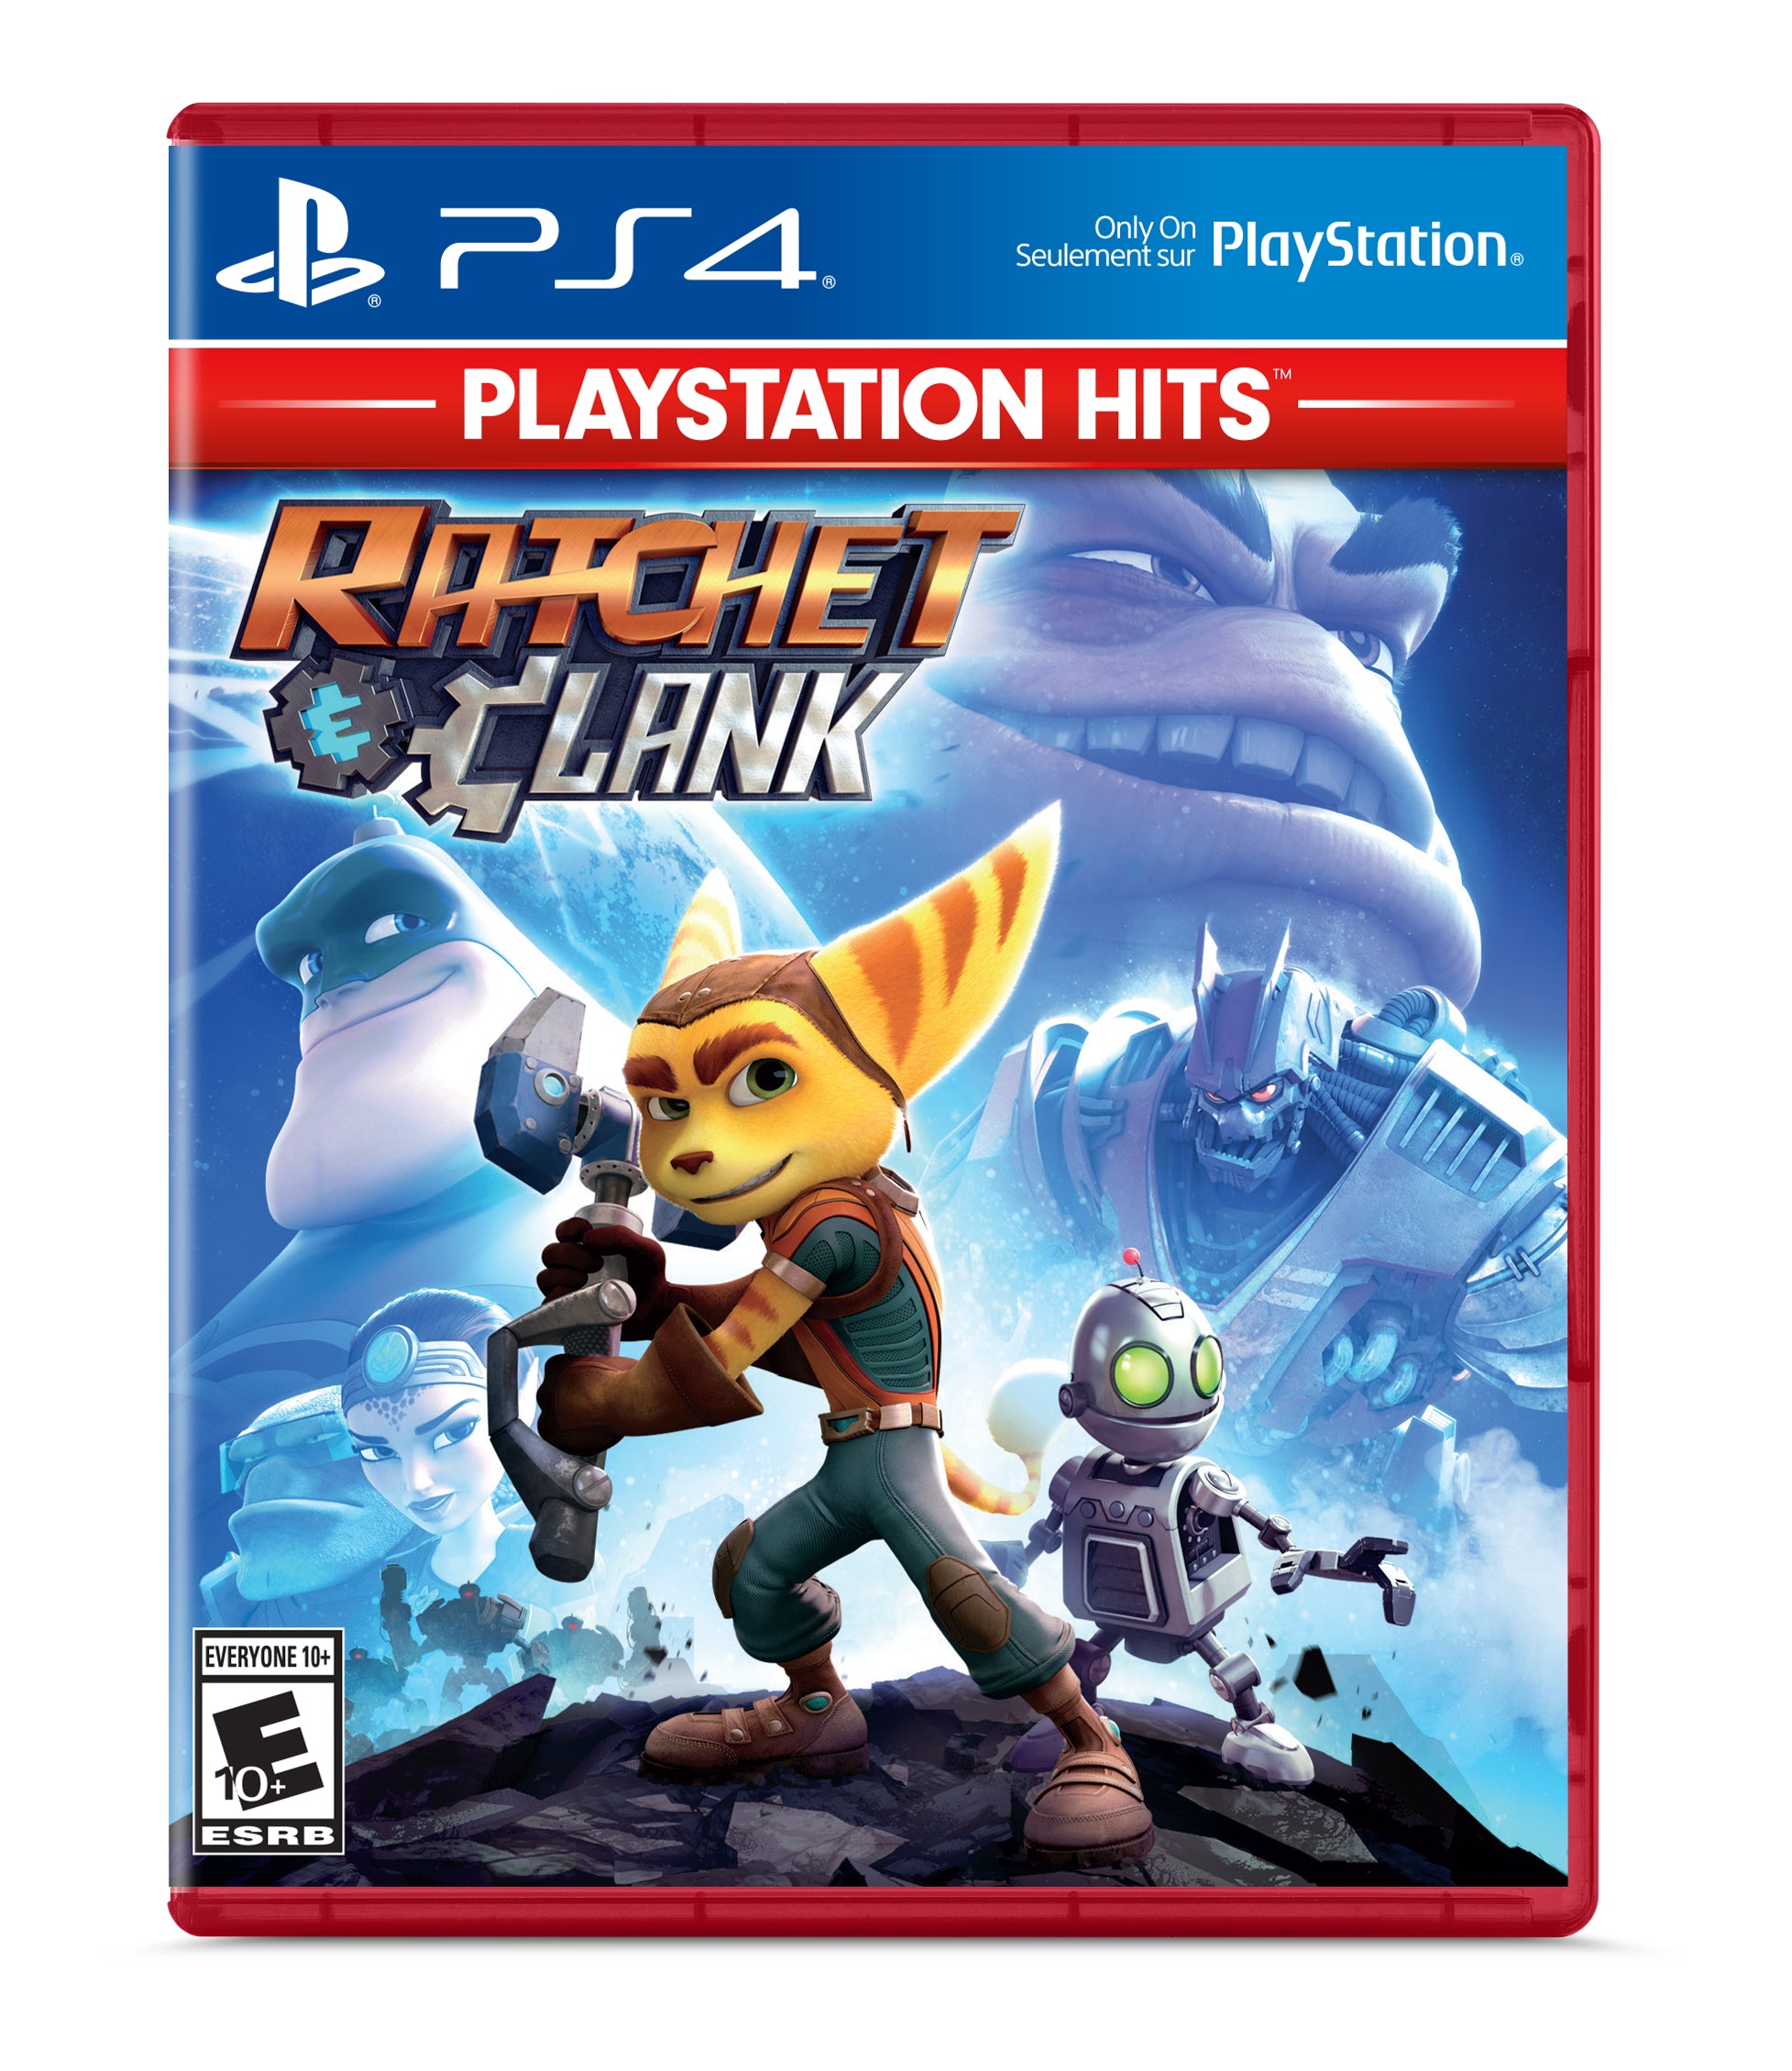 Sony PlayStation 4 Slim Ratchet & Clank Bundle Upgrade 1TB SSD PS4 Gaming Console, Jet Black, with Mytrix Chat Headset - Internal Fast Solid State Drive Enhanced PS4 Console